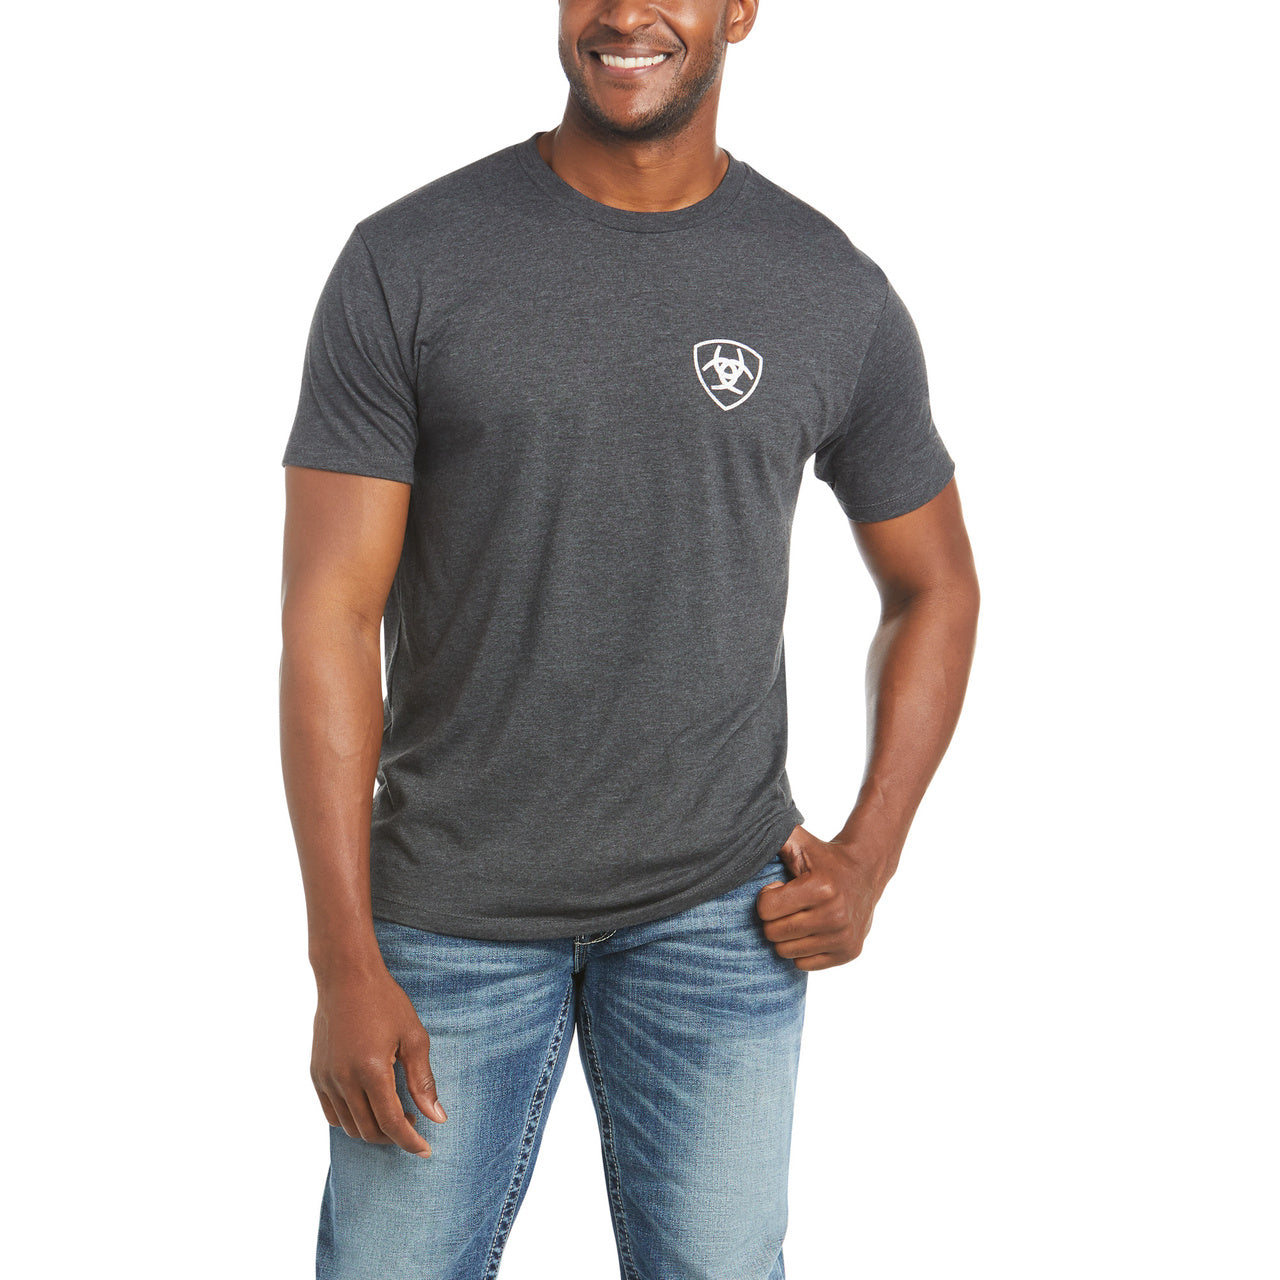 Ariat Men's US Of A Charcoal Heather Tee Shirt 10035622